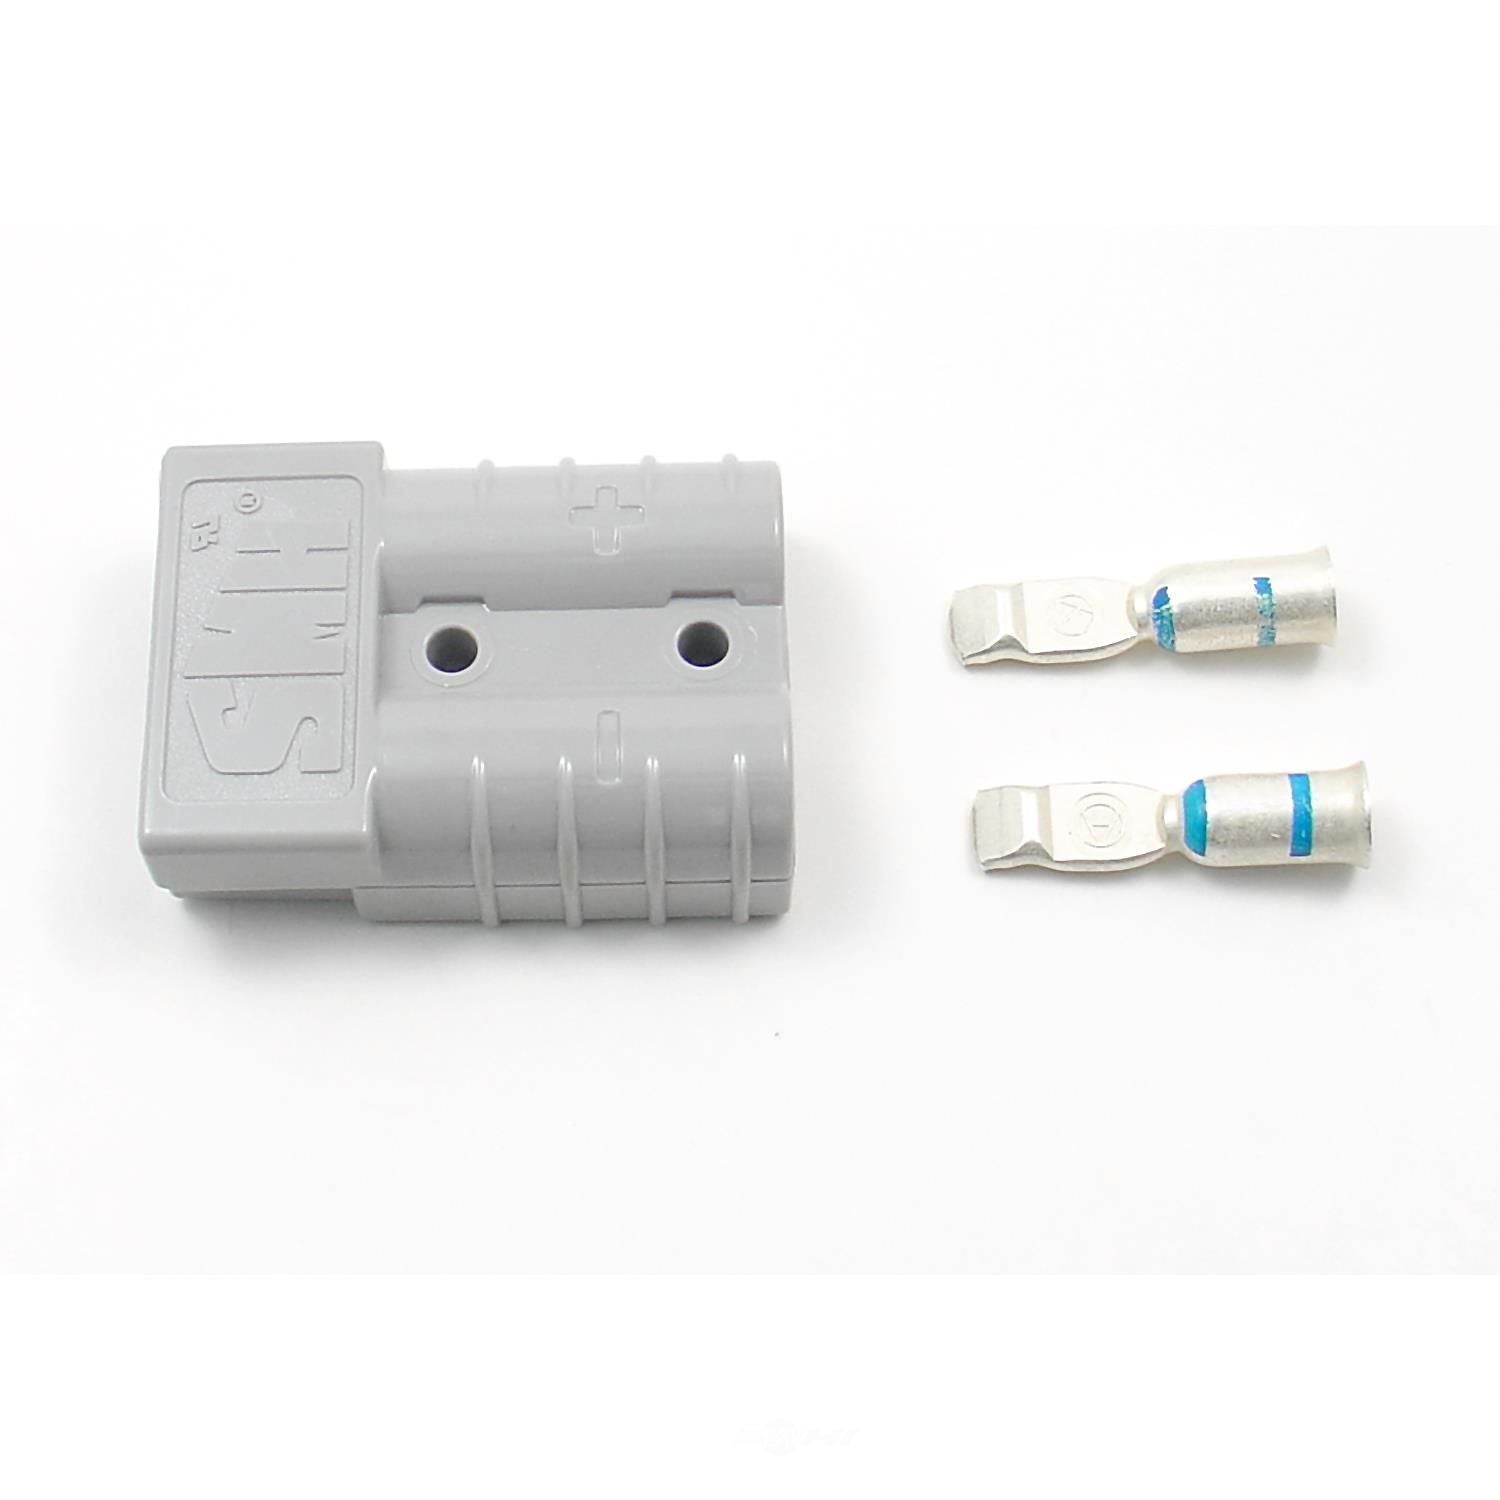 YSP BA99KGY Wells Quick Connect Battery Coupler with Terminals (50A, 6G)